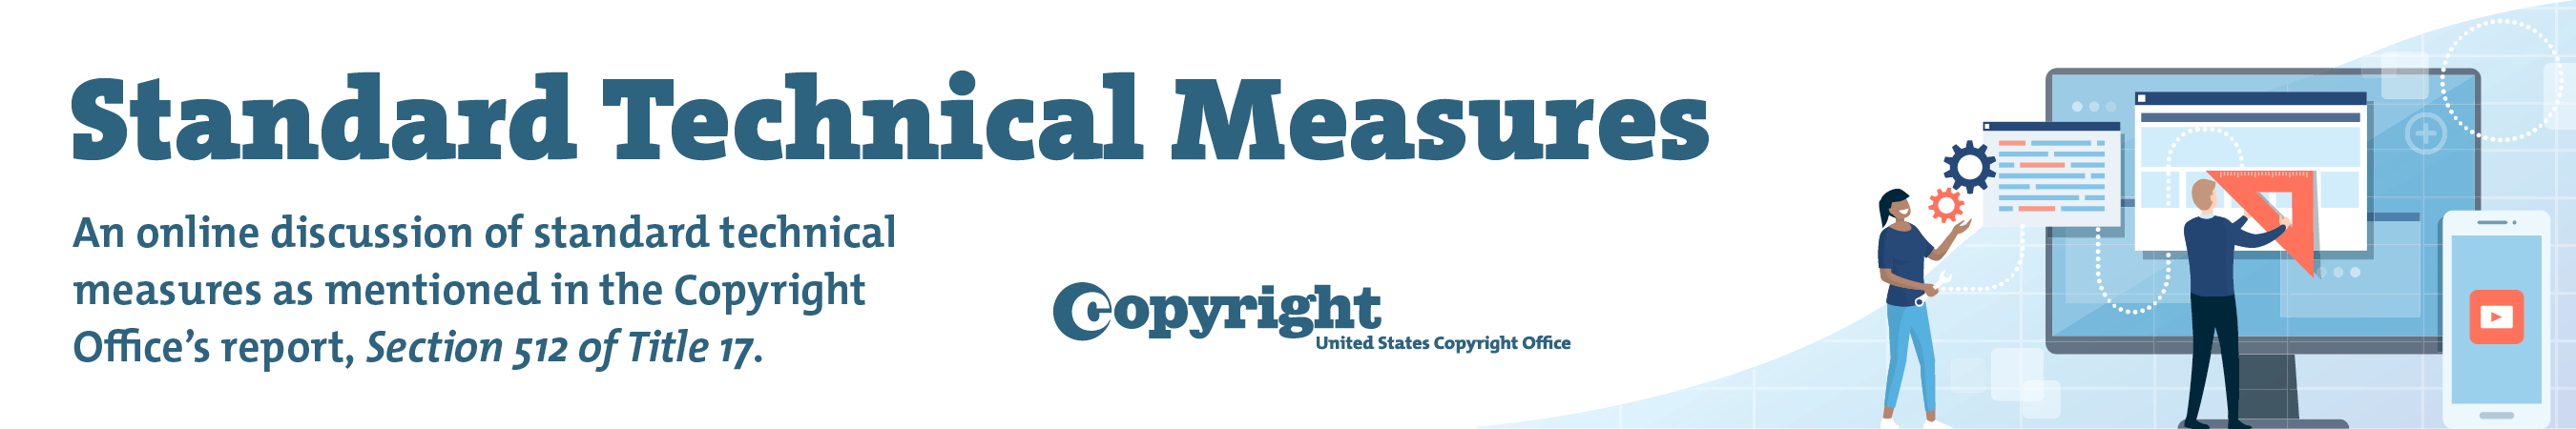 Standard Technical Measures: An online discussion of standard technical measures as mentined in the Copyright Office's report, Section 512 of Title 17